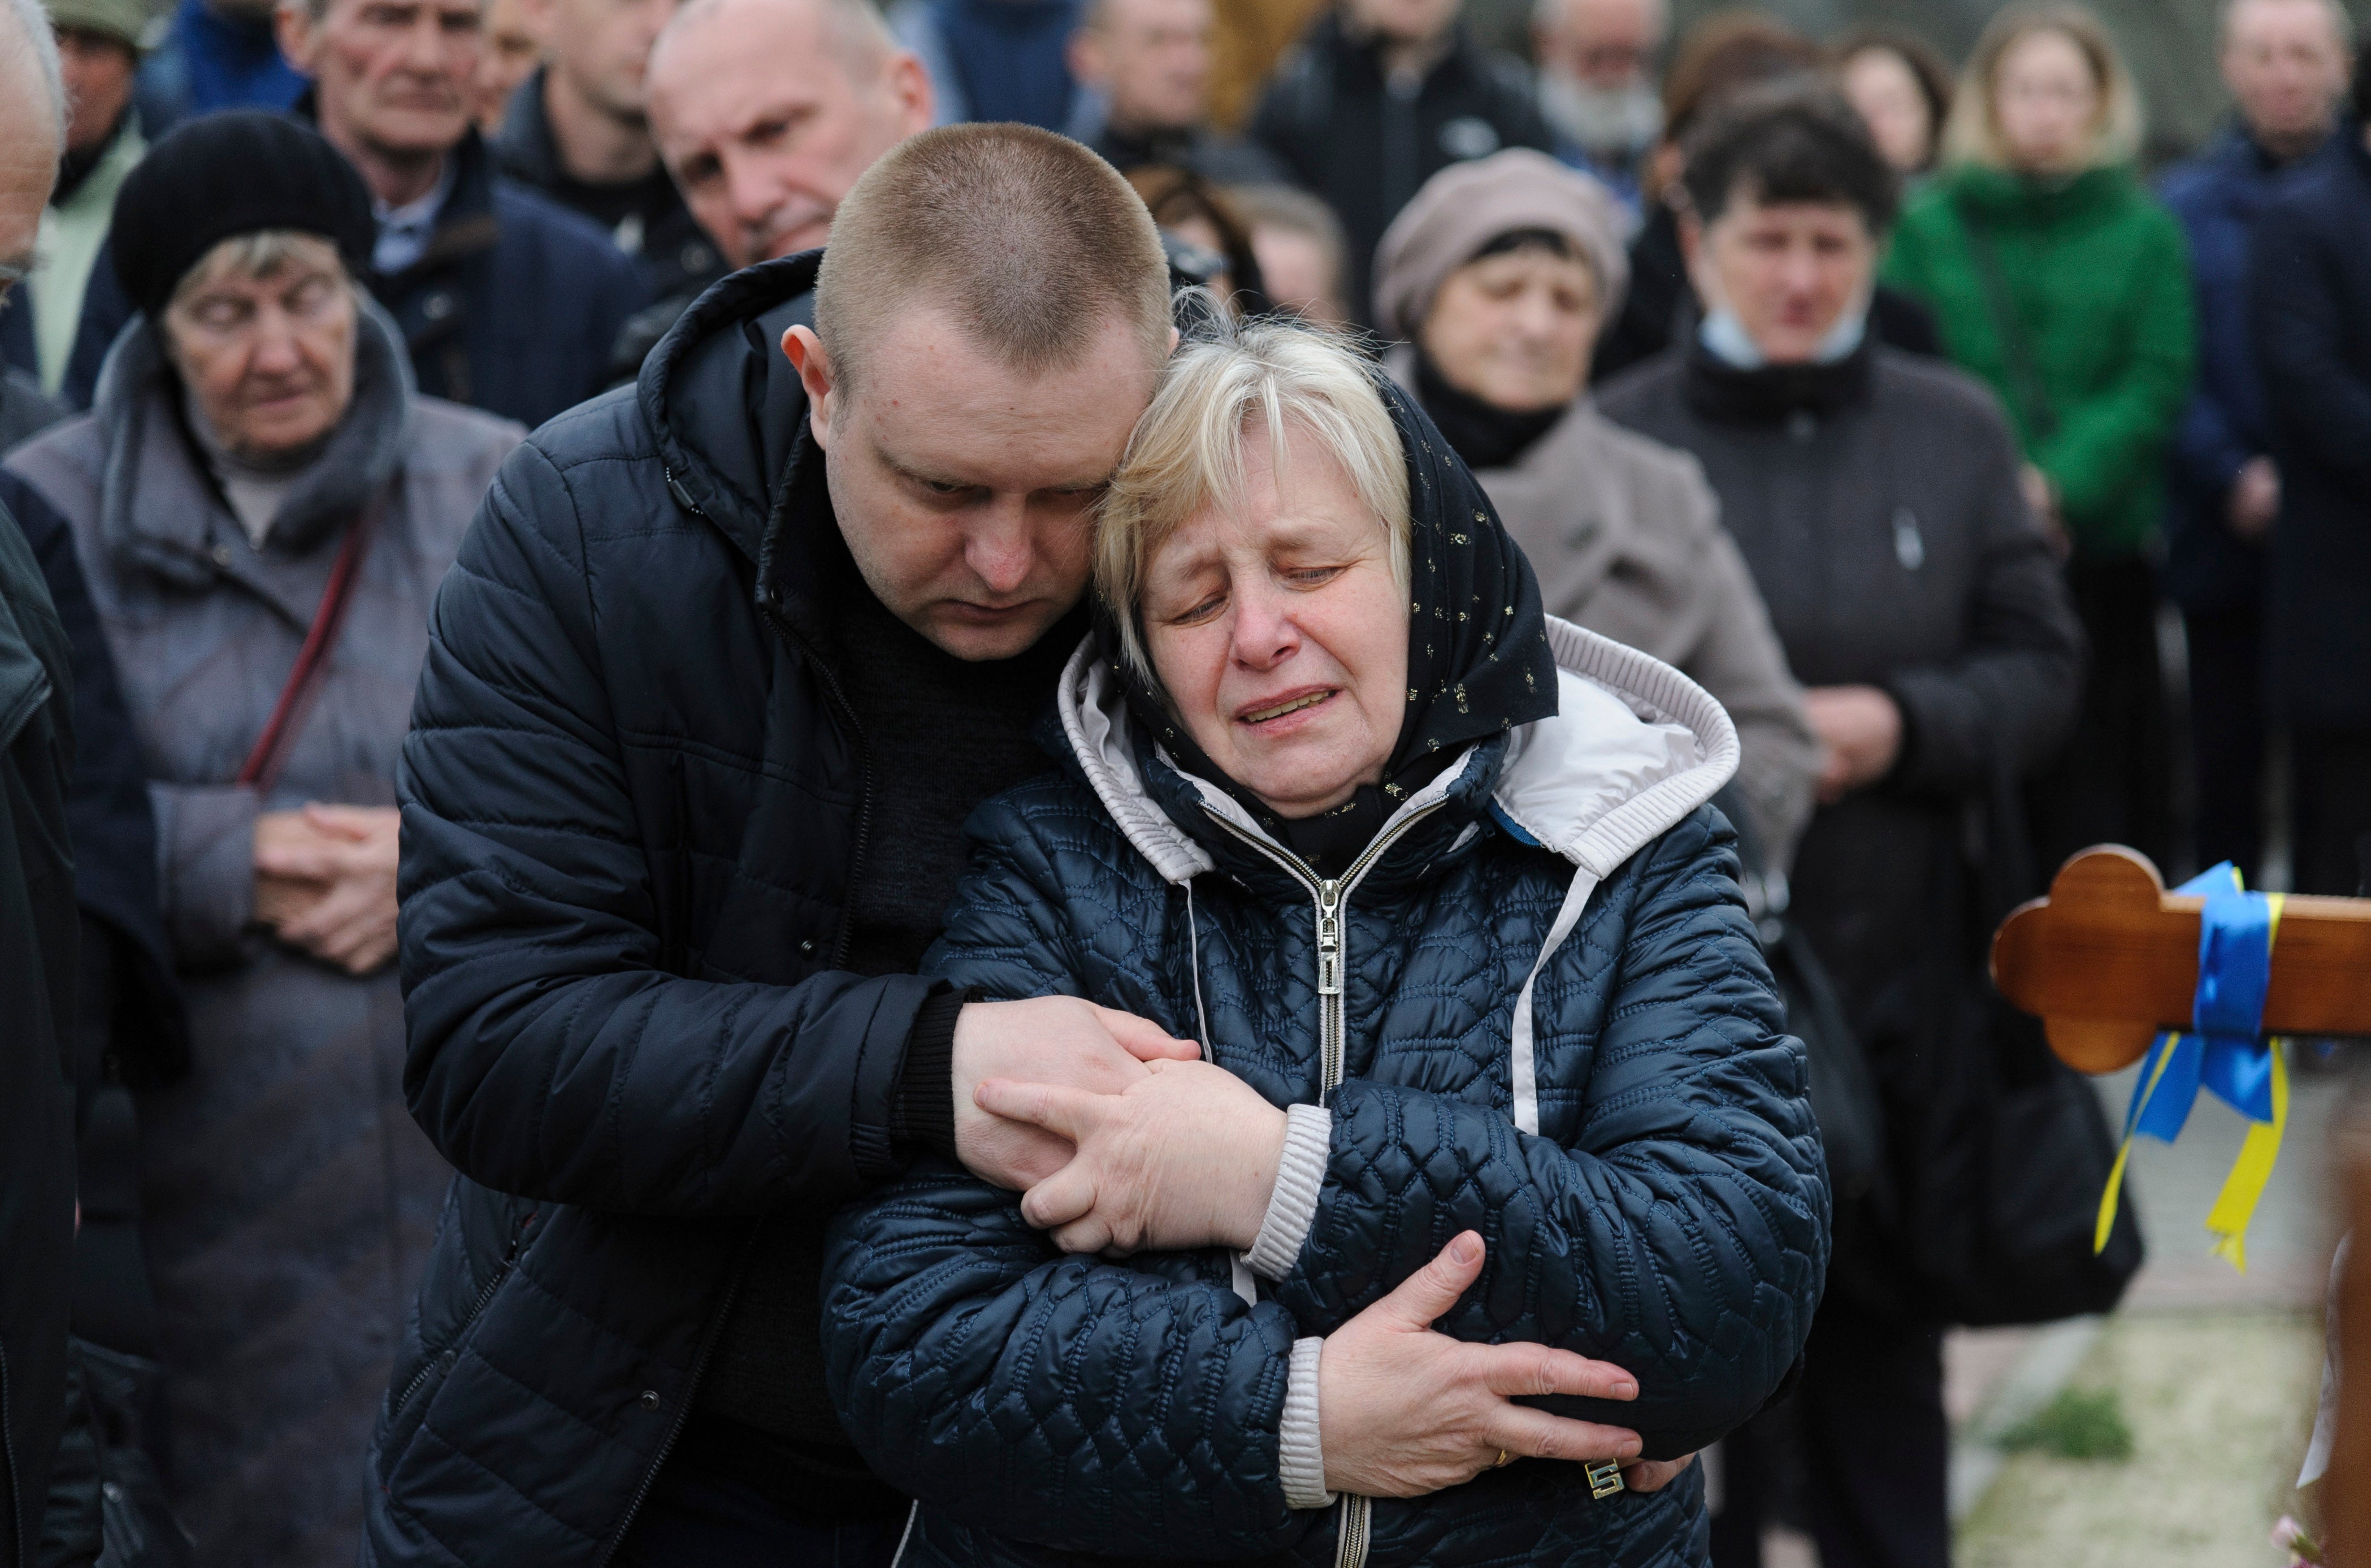 Relatives are comforted during the funeral ceremony on Thursday of Ukrainian servicemen who died during the Russian invasion